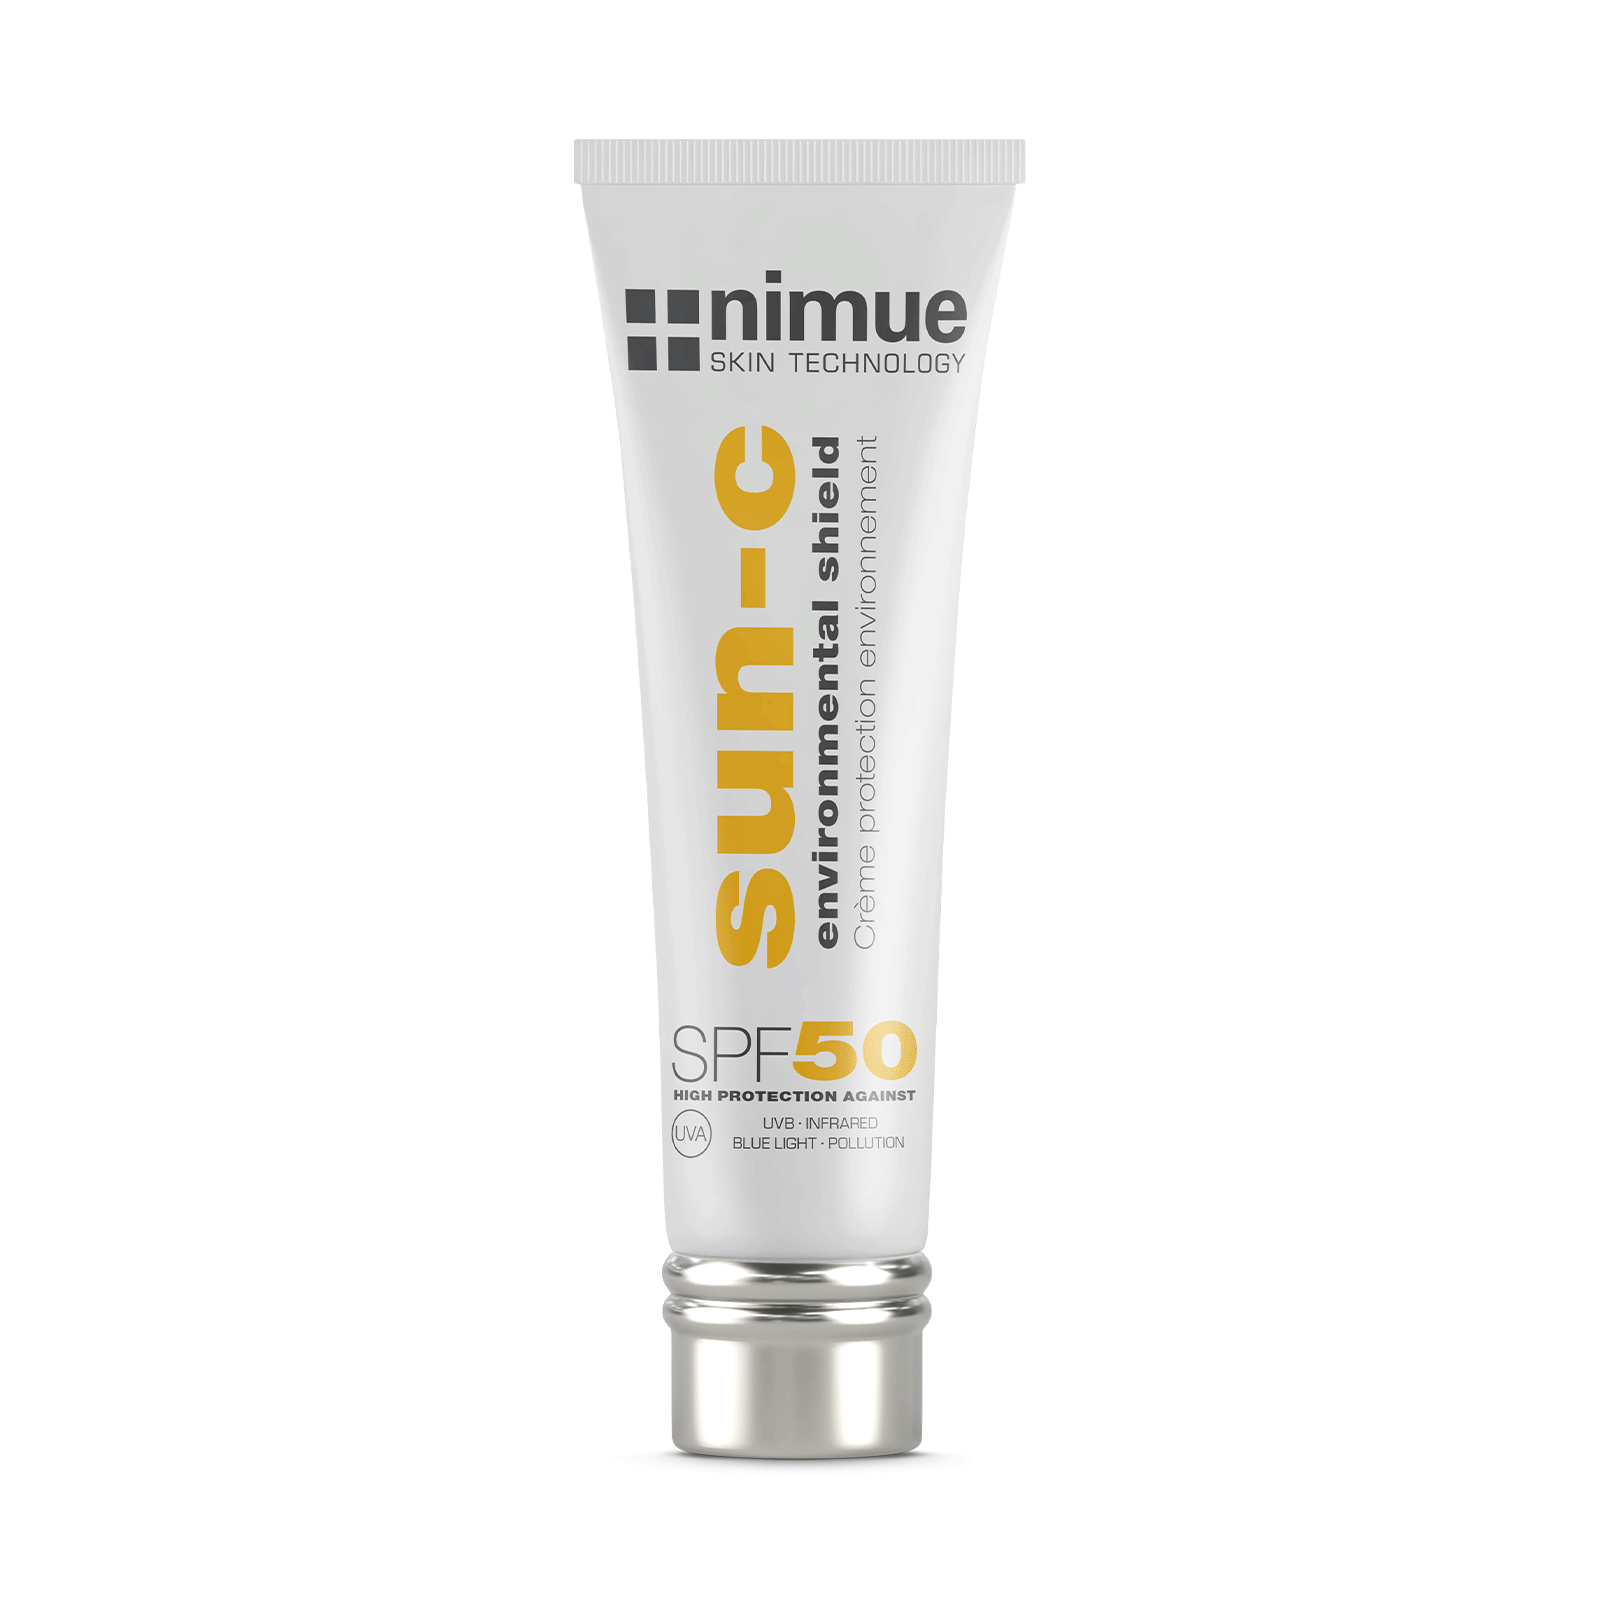 Nimue Sun-C SPF 50 from Sweet Squared UK